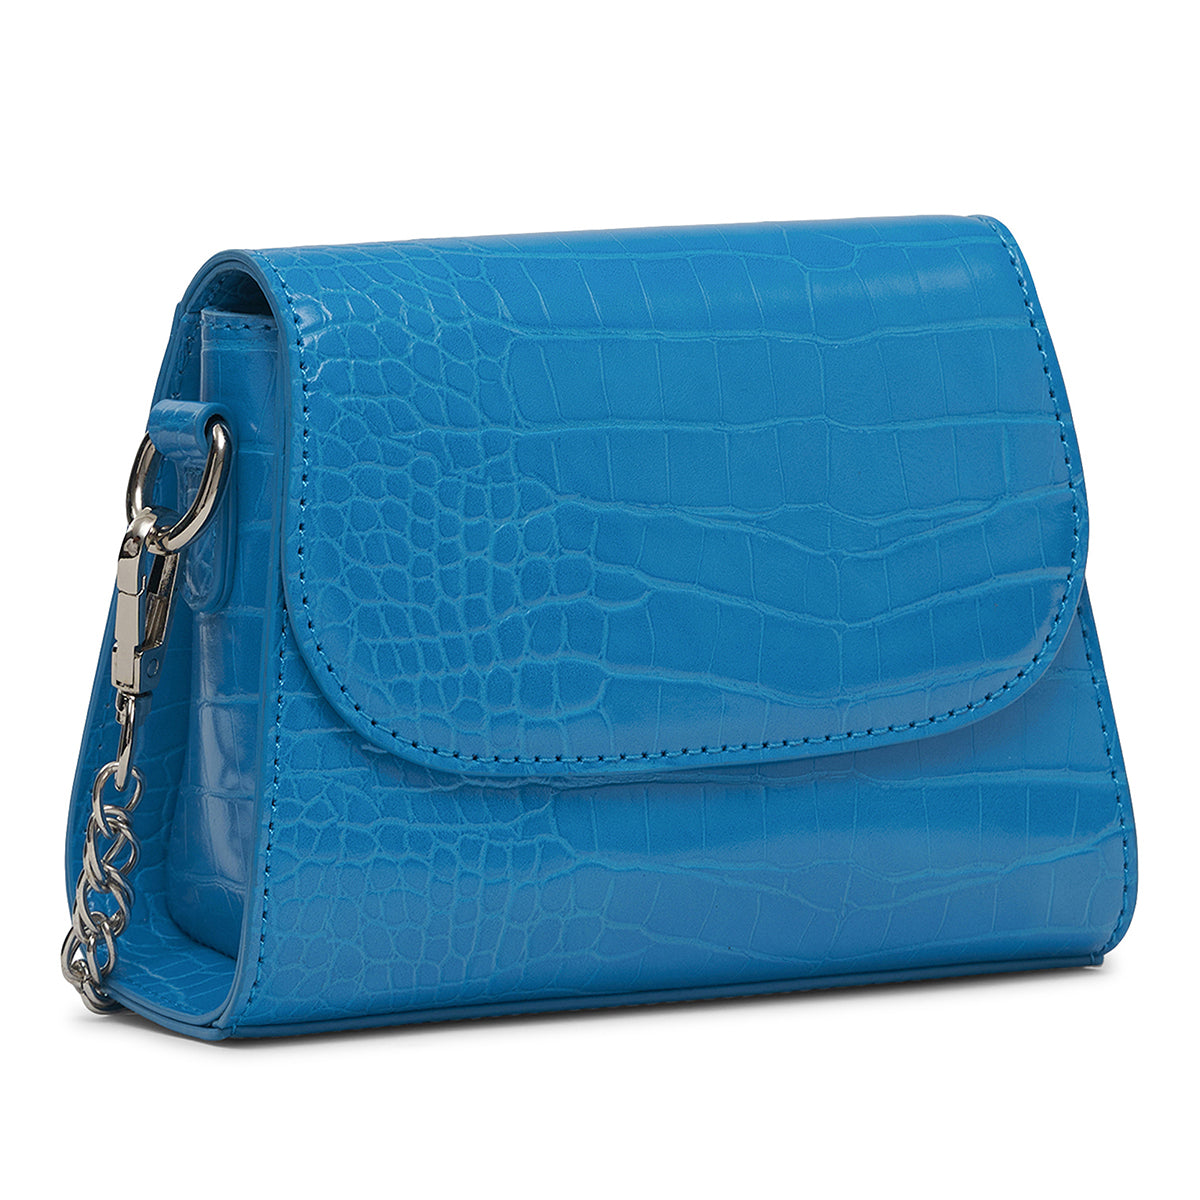 Miraggio Kylee Quilted Handbag with Sling Chain Strap